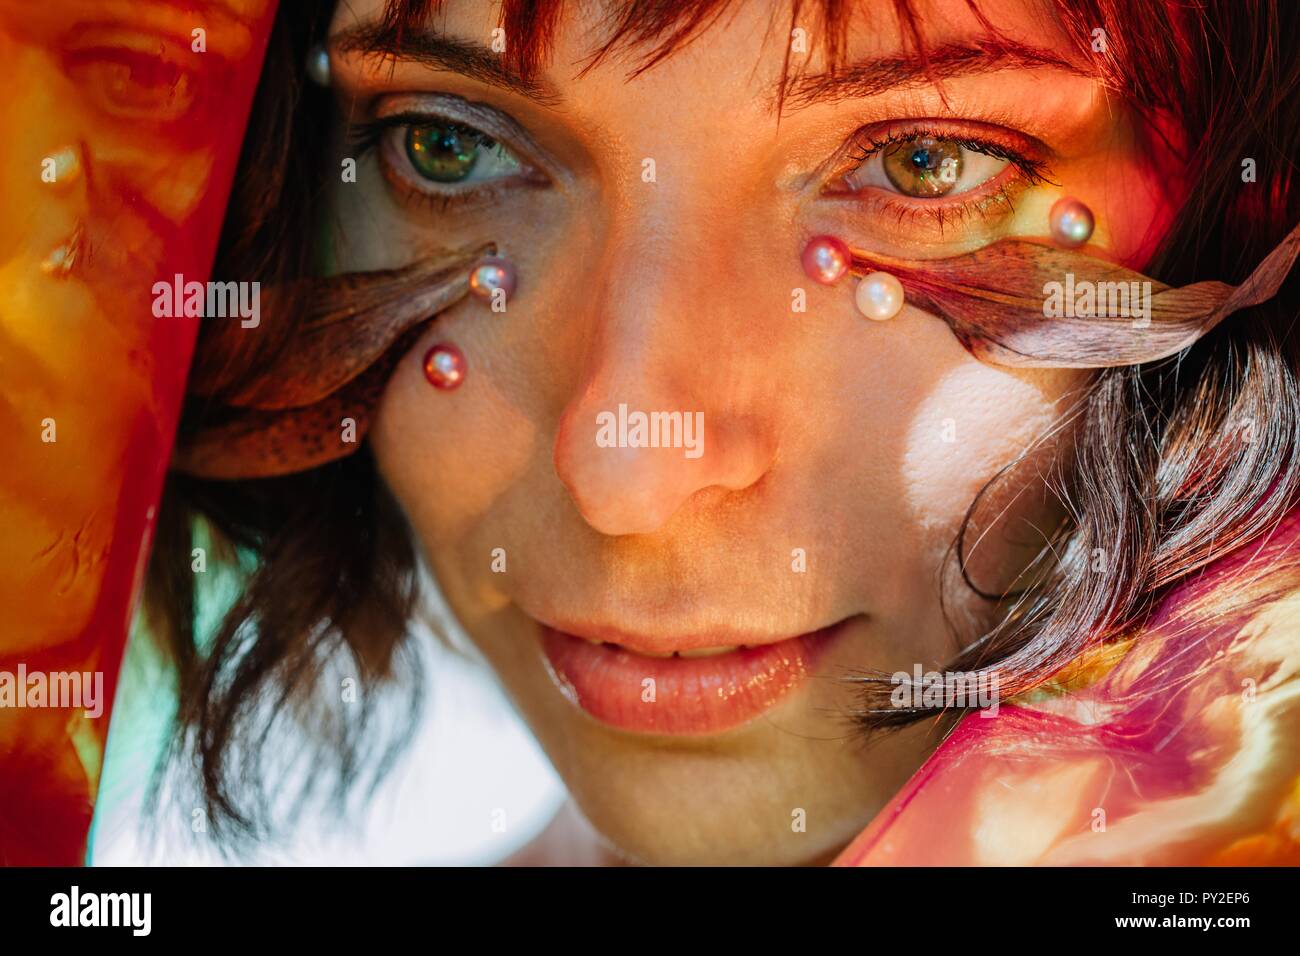 Conceptual beauty portrait of a woman with pearls and a leaf on her face Stock Photo